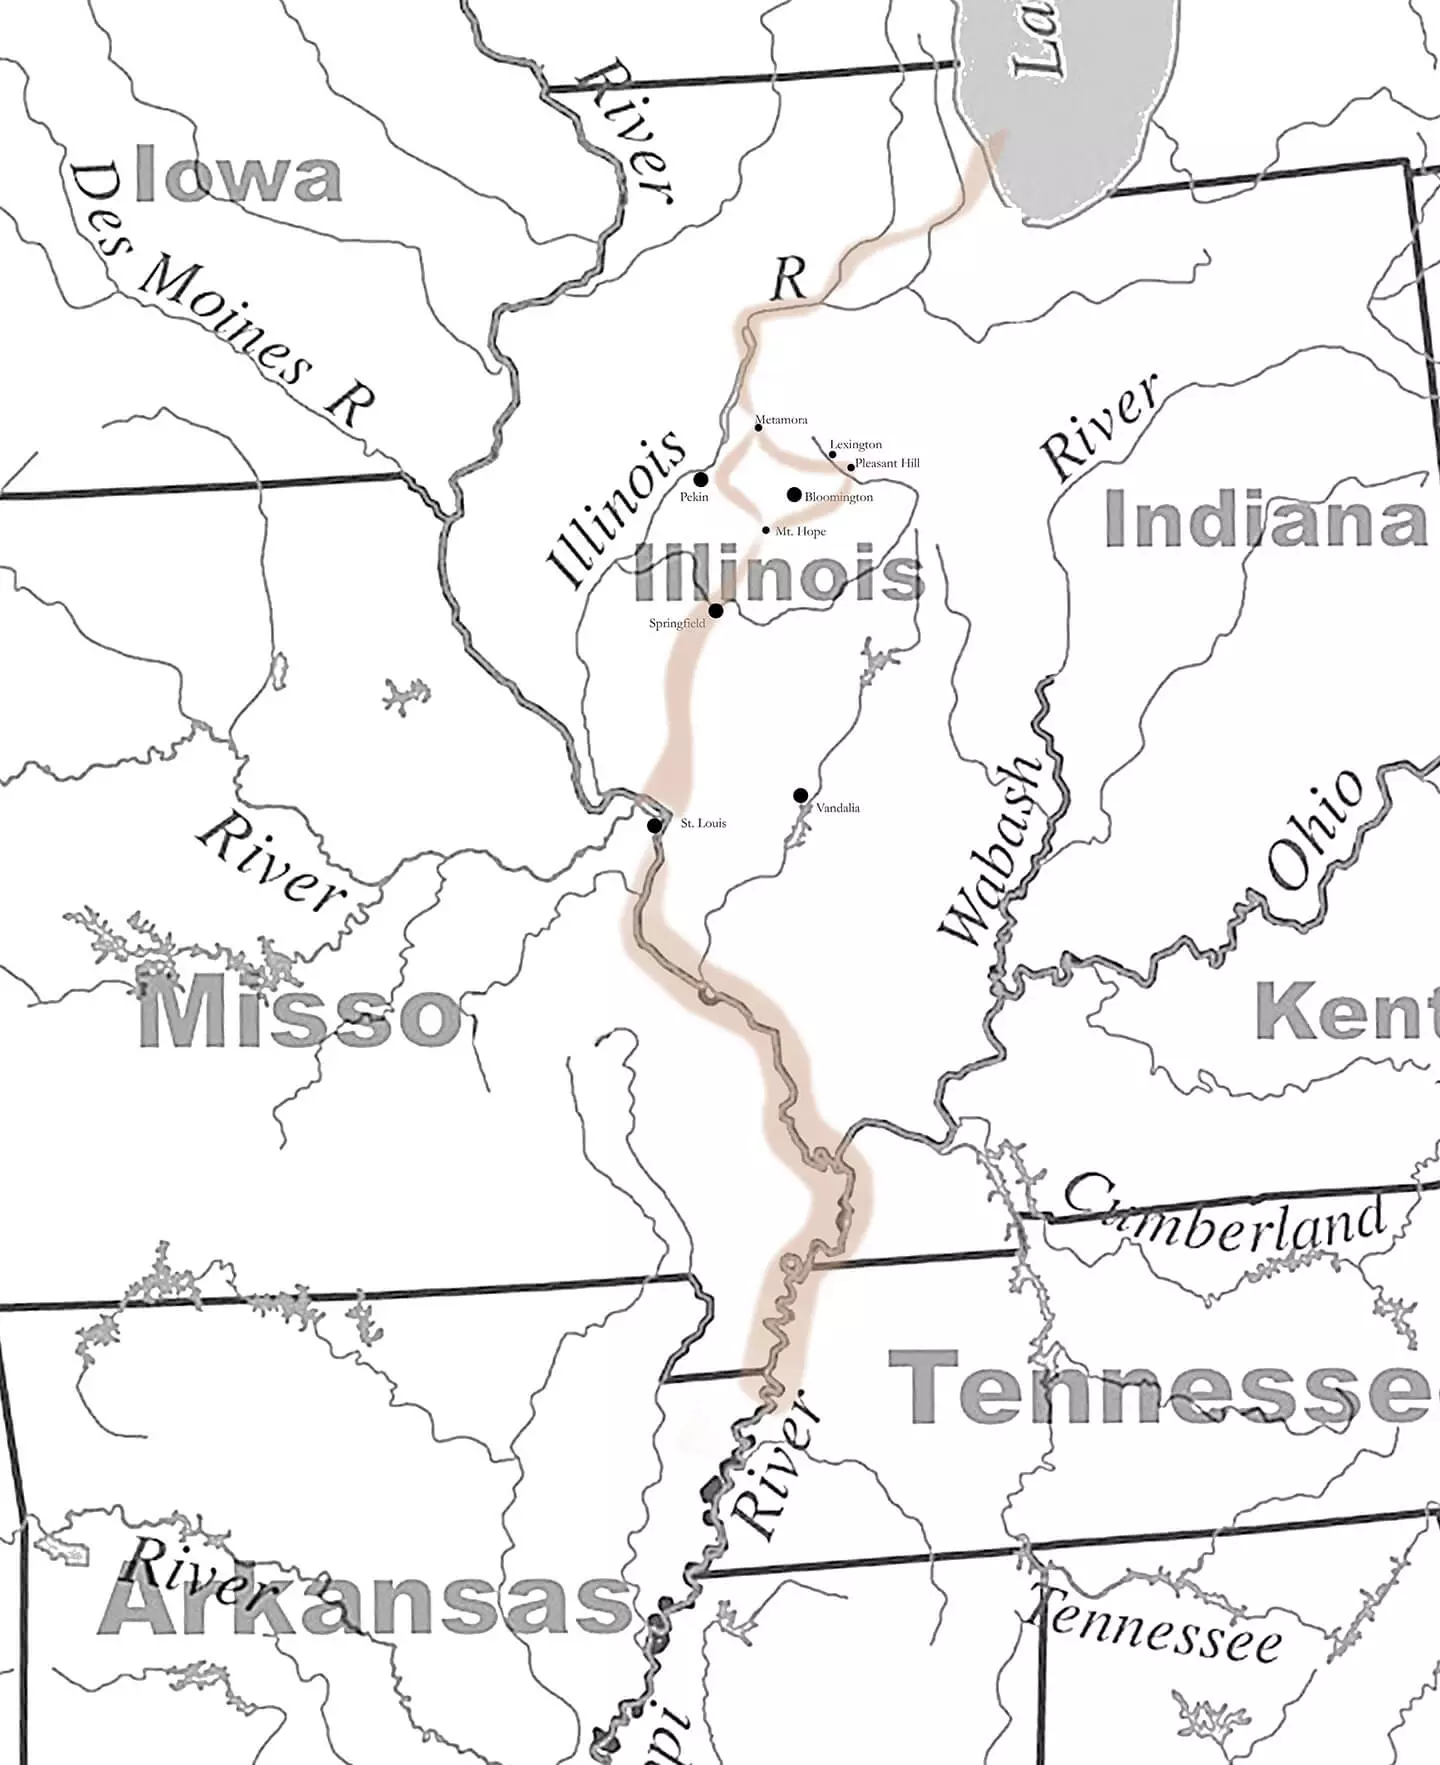 Map of Illinois and surrounding states, showing a line that goes from Chicago south to Central Illinios, where it splits into two, one path going west and bending near Pekin and the other going east, bending near Lexington. The two paths converge near Mt Hope in southern McLean County and continue southwest through Springfield towards St. Louis.